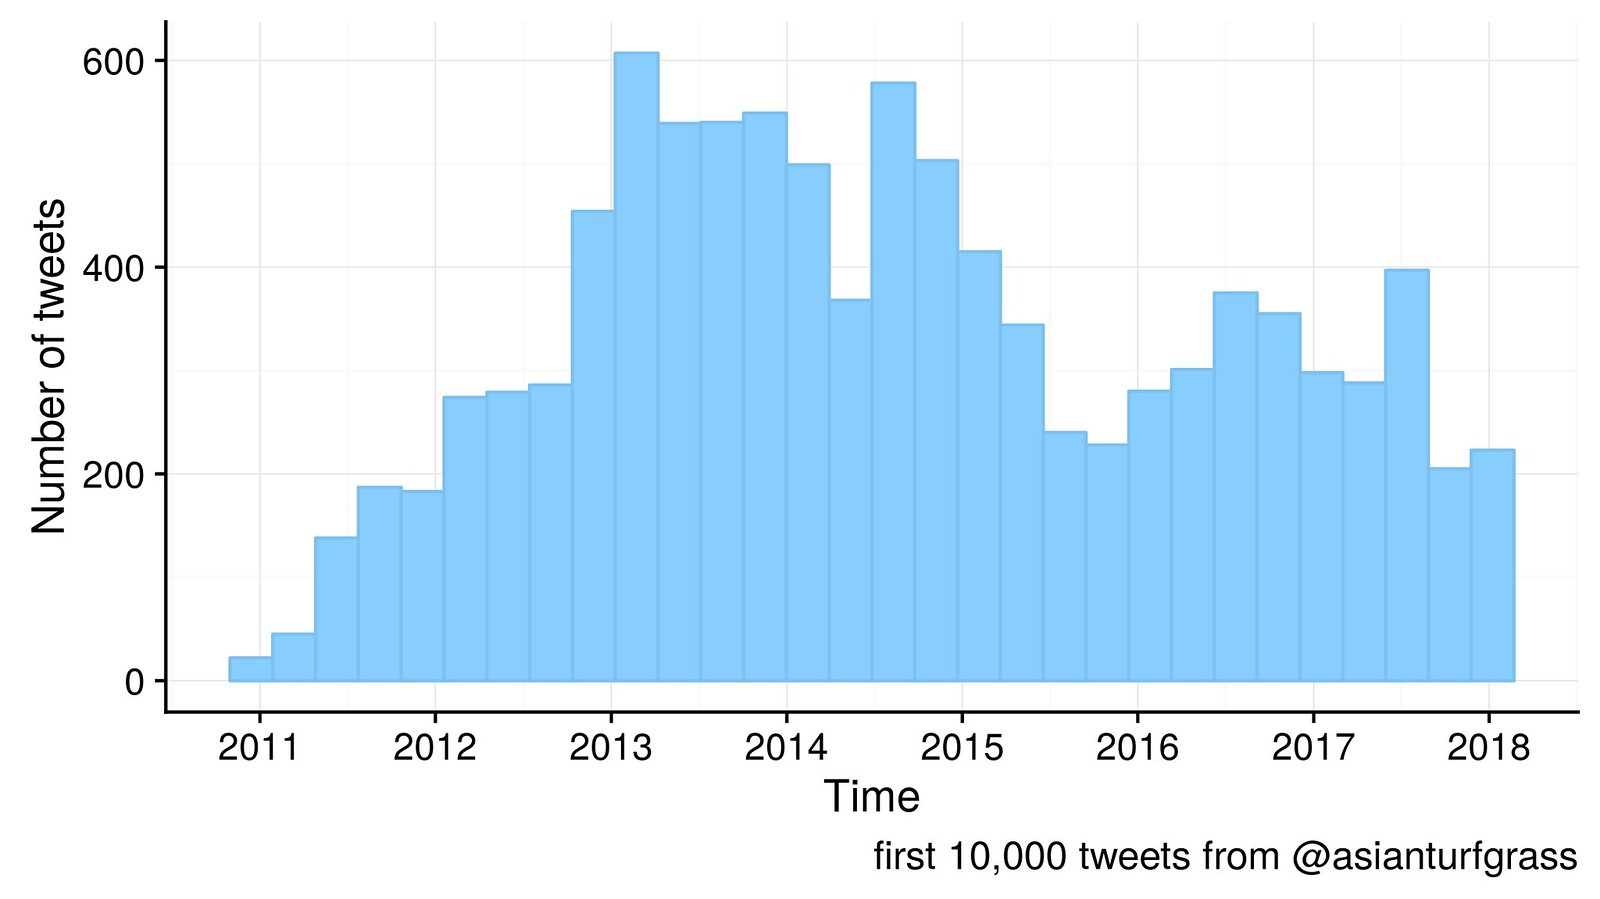 tweets by time sent, as histogram